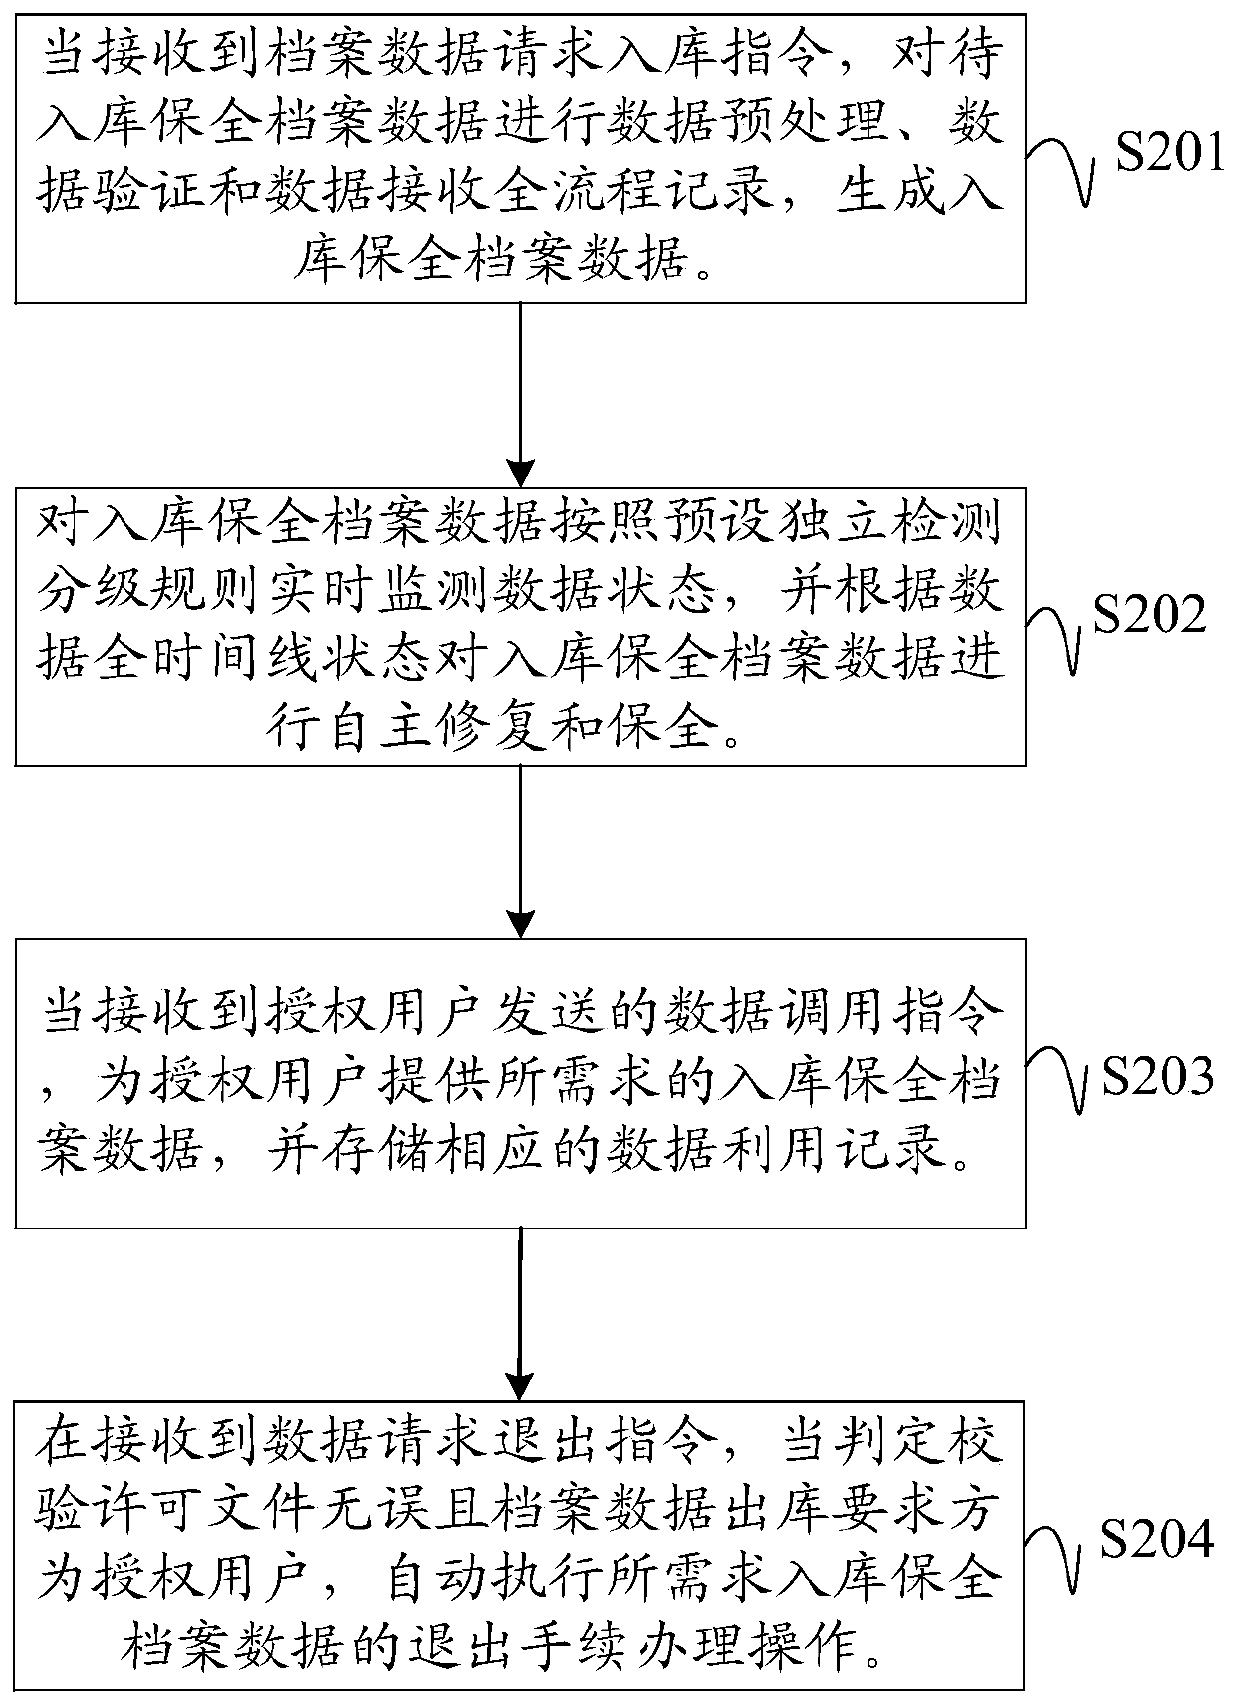 Electronic archive data preservation system and method